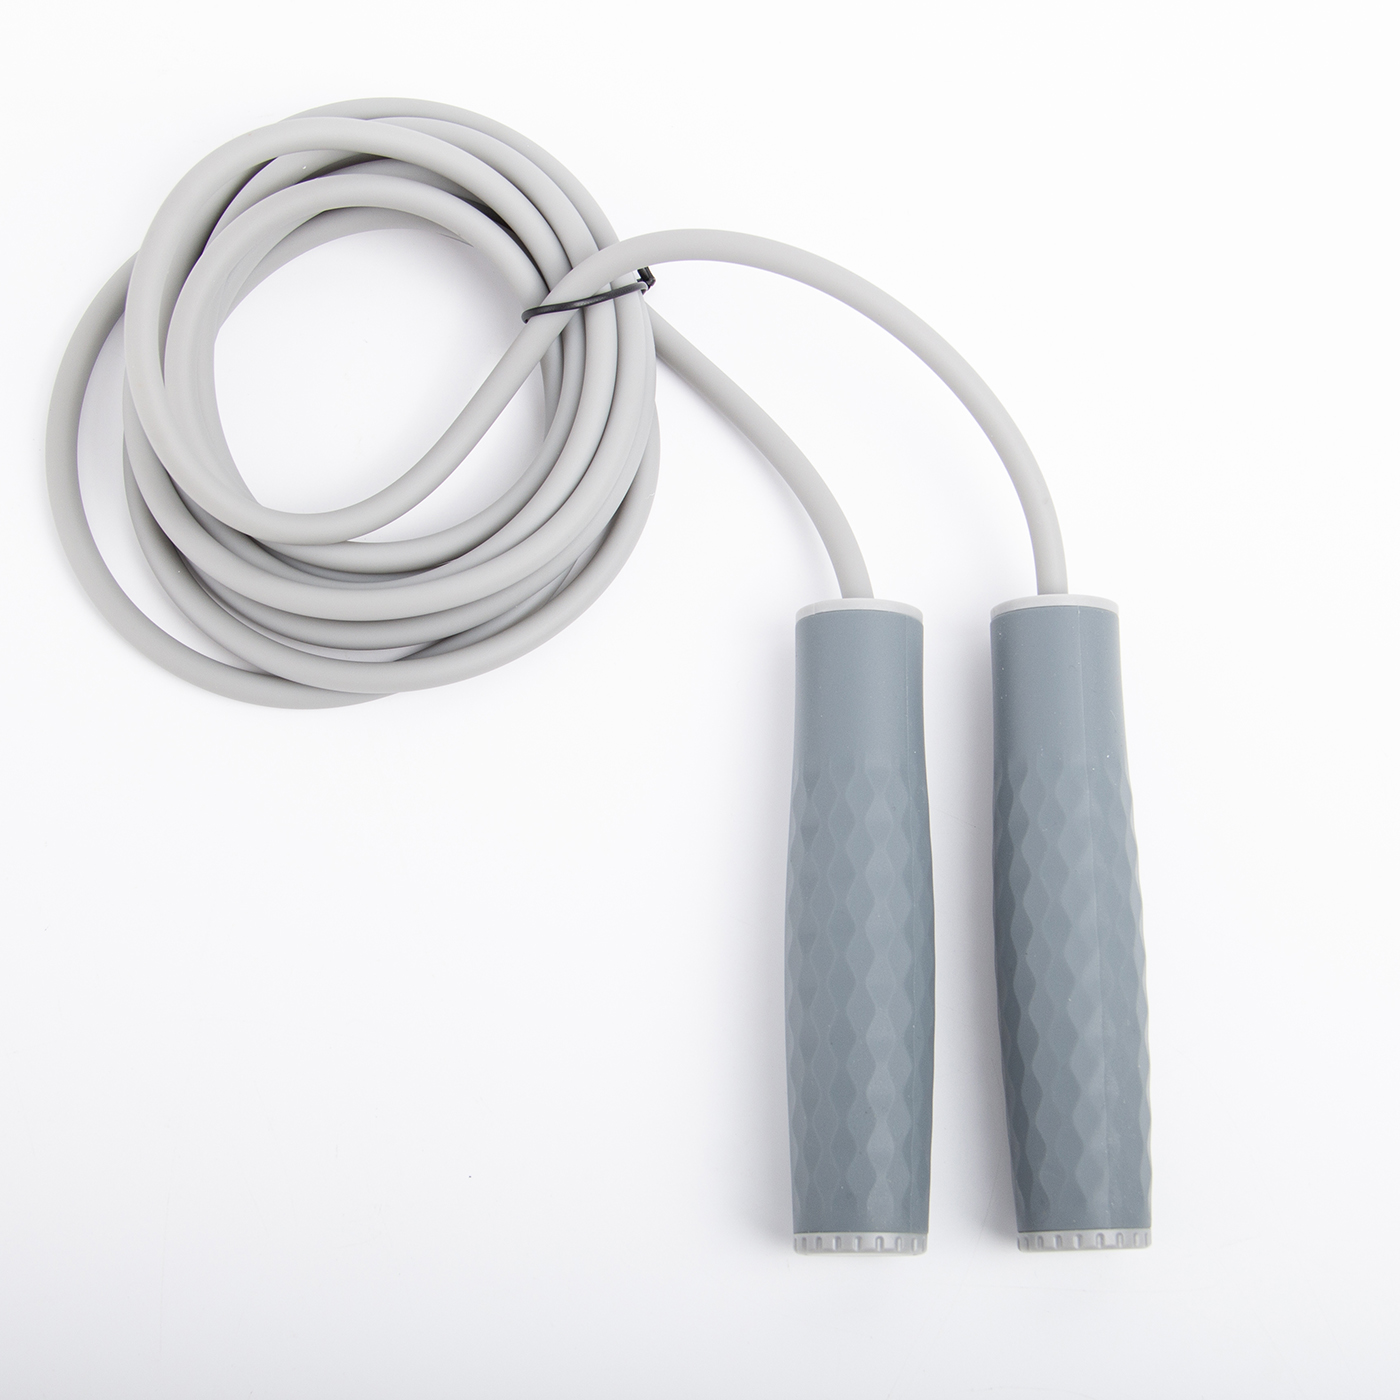 Silicone Speed Jump Rope2